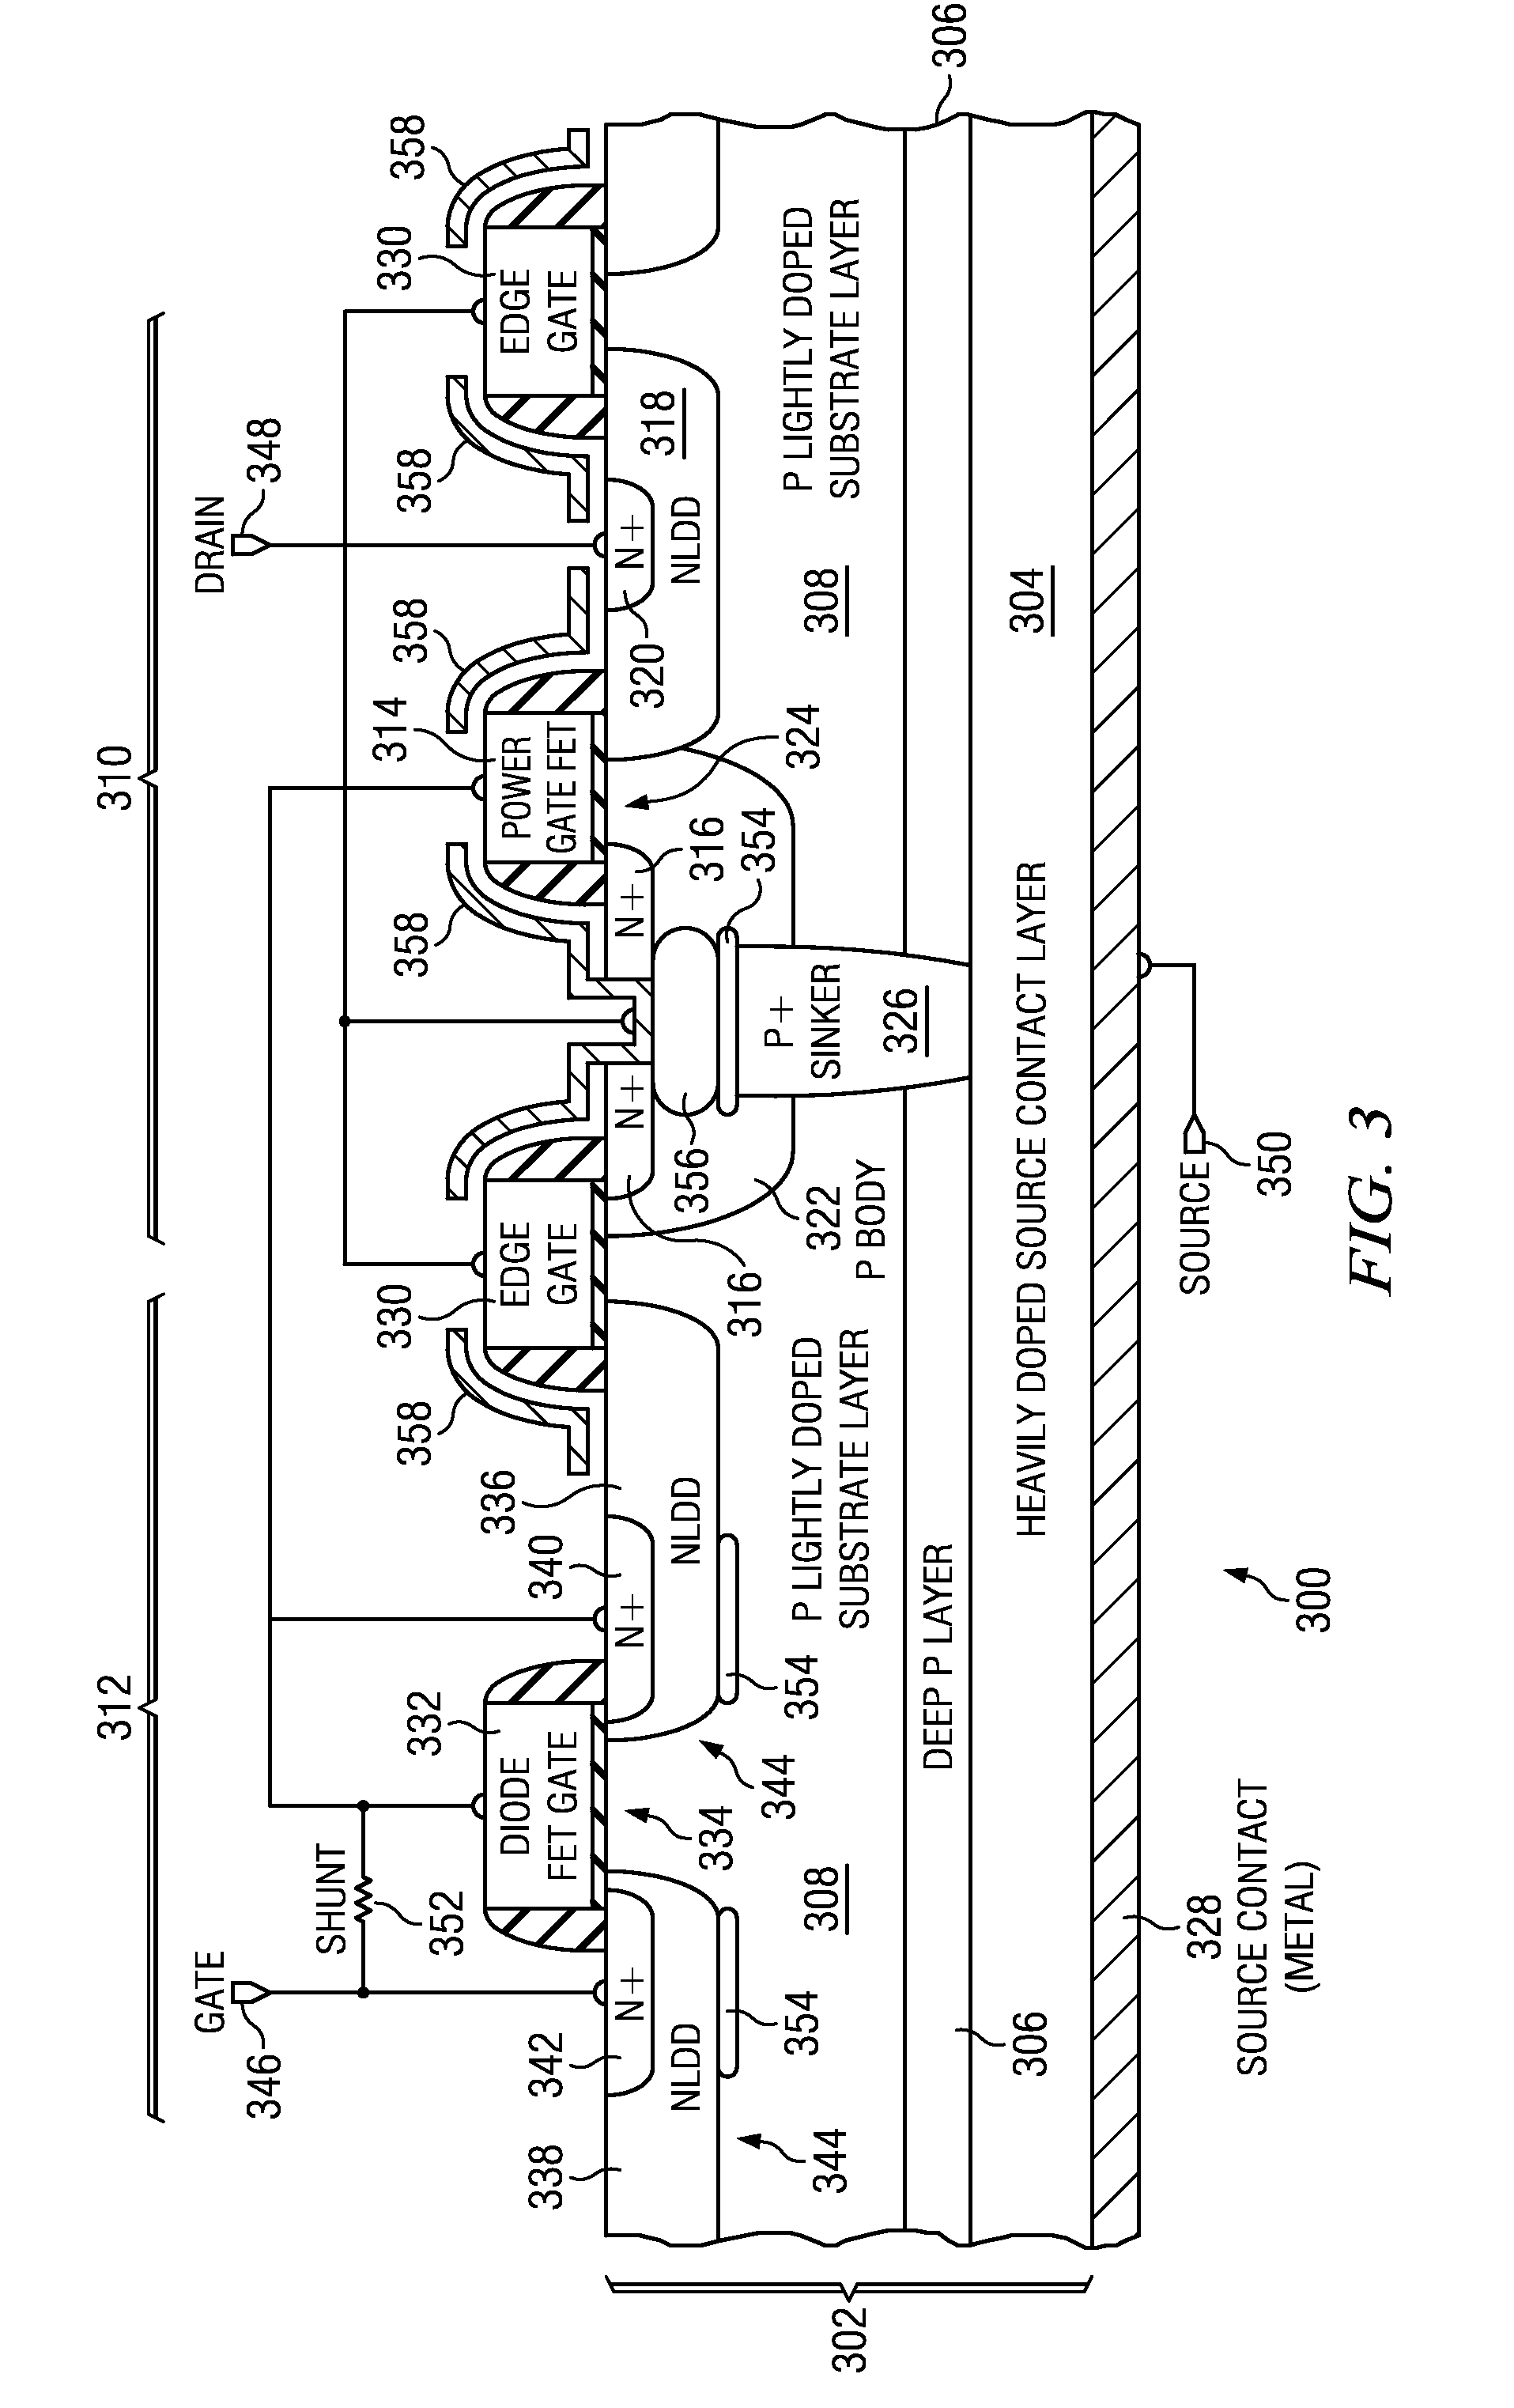 Power mosfet with integrated gate resistor and diode-connected mosfet